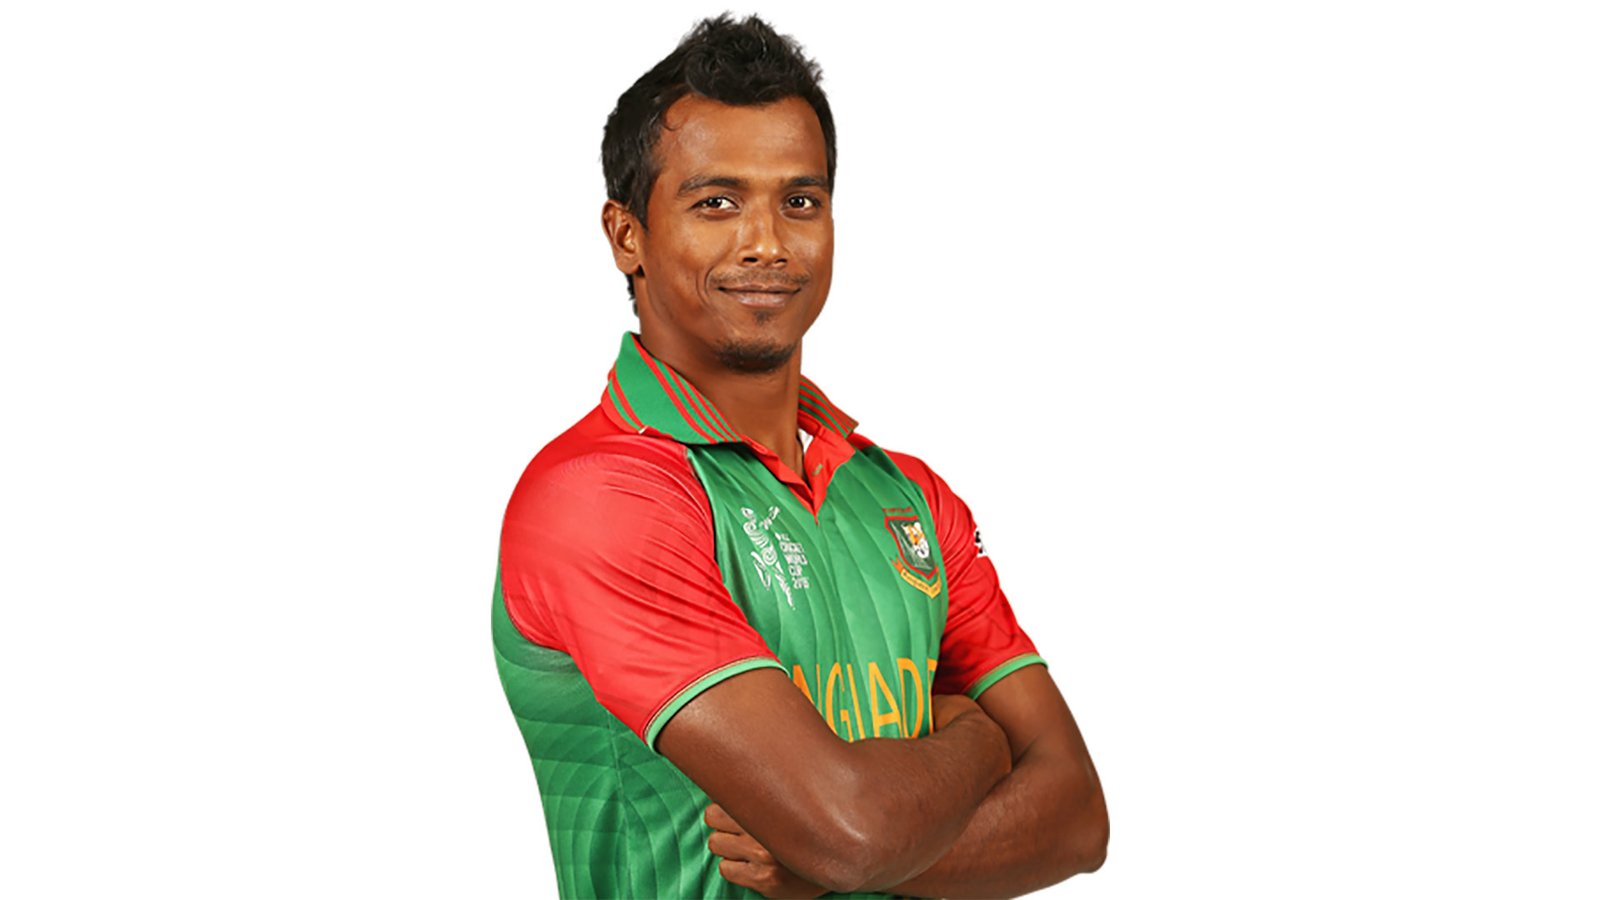 Rubel Hossain Affairs, Height, Weight, Age, Family, Wife, Biography & More - StarsUnfolded